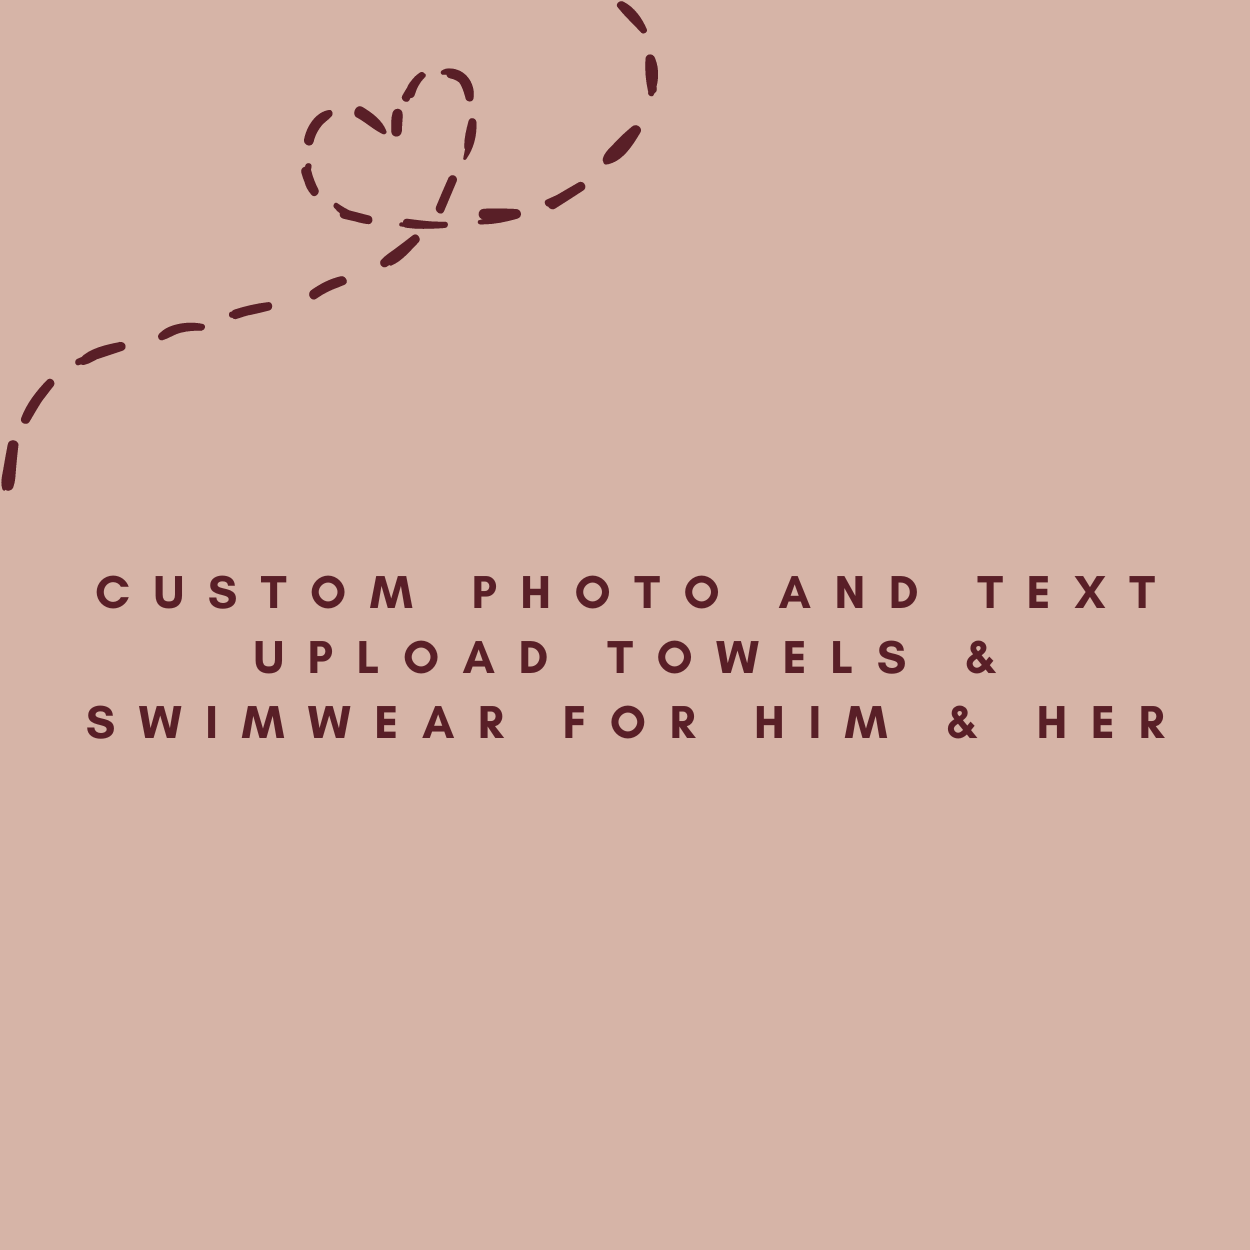 Custom photo and text upload towels & Swimwear for Him & Her